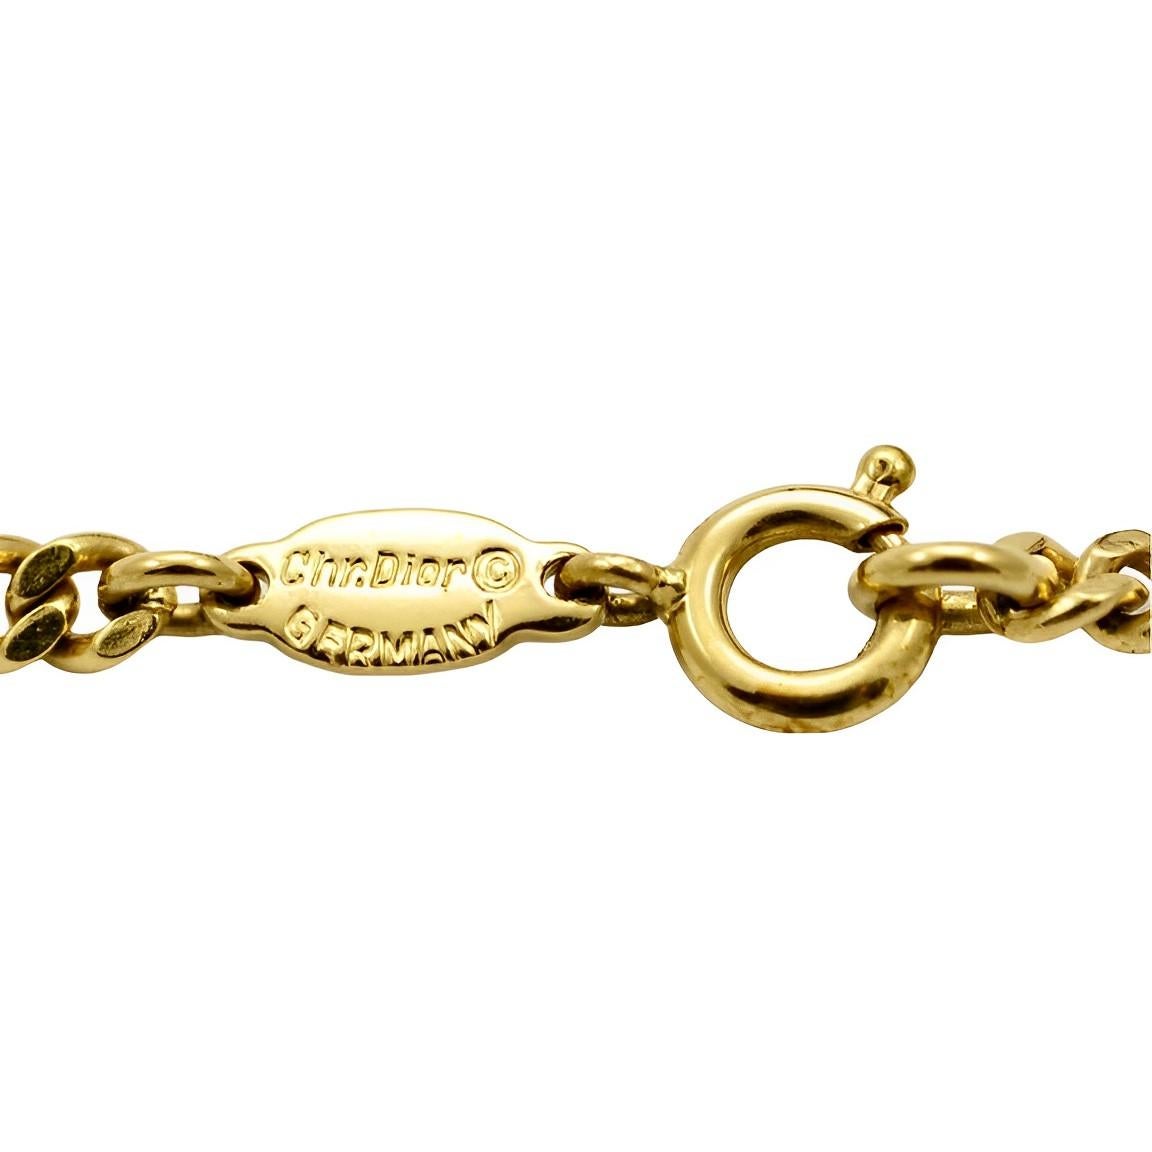 Christian Dior gold plated curb link chain necklace, with ornate detail. Measuring length 77.8 cm / 30.6 inches. There is some wear to the gold plating.

This is a beautiful and stylish chain necklace from the couture house of Christian Dior. Circa